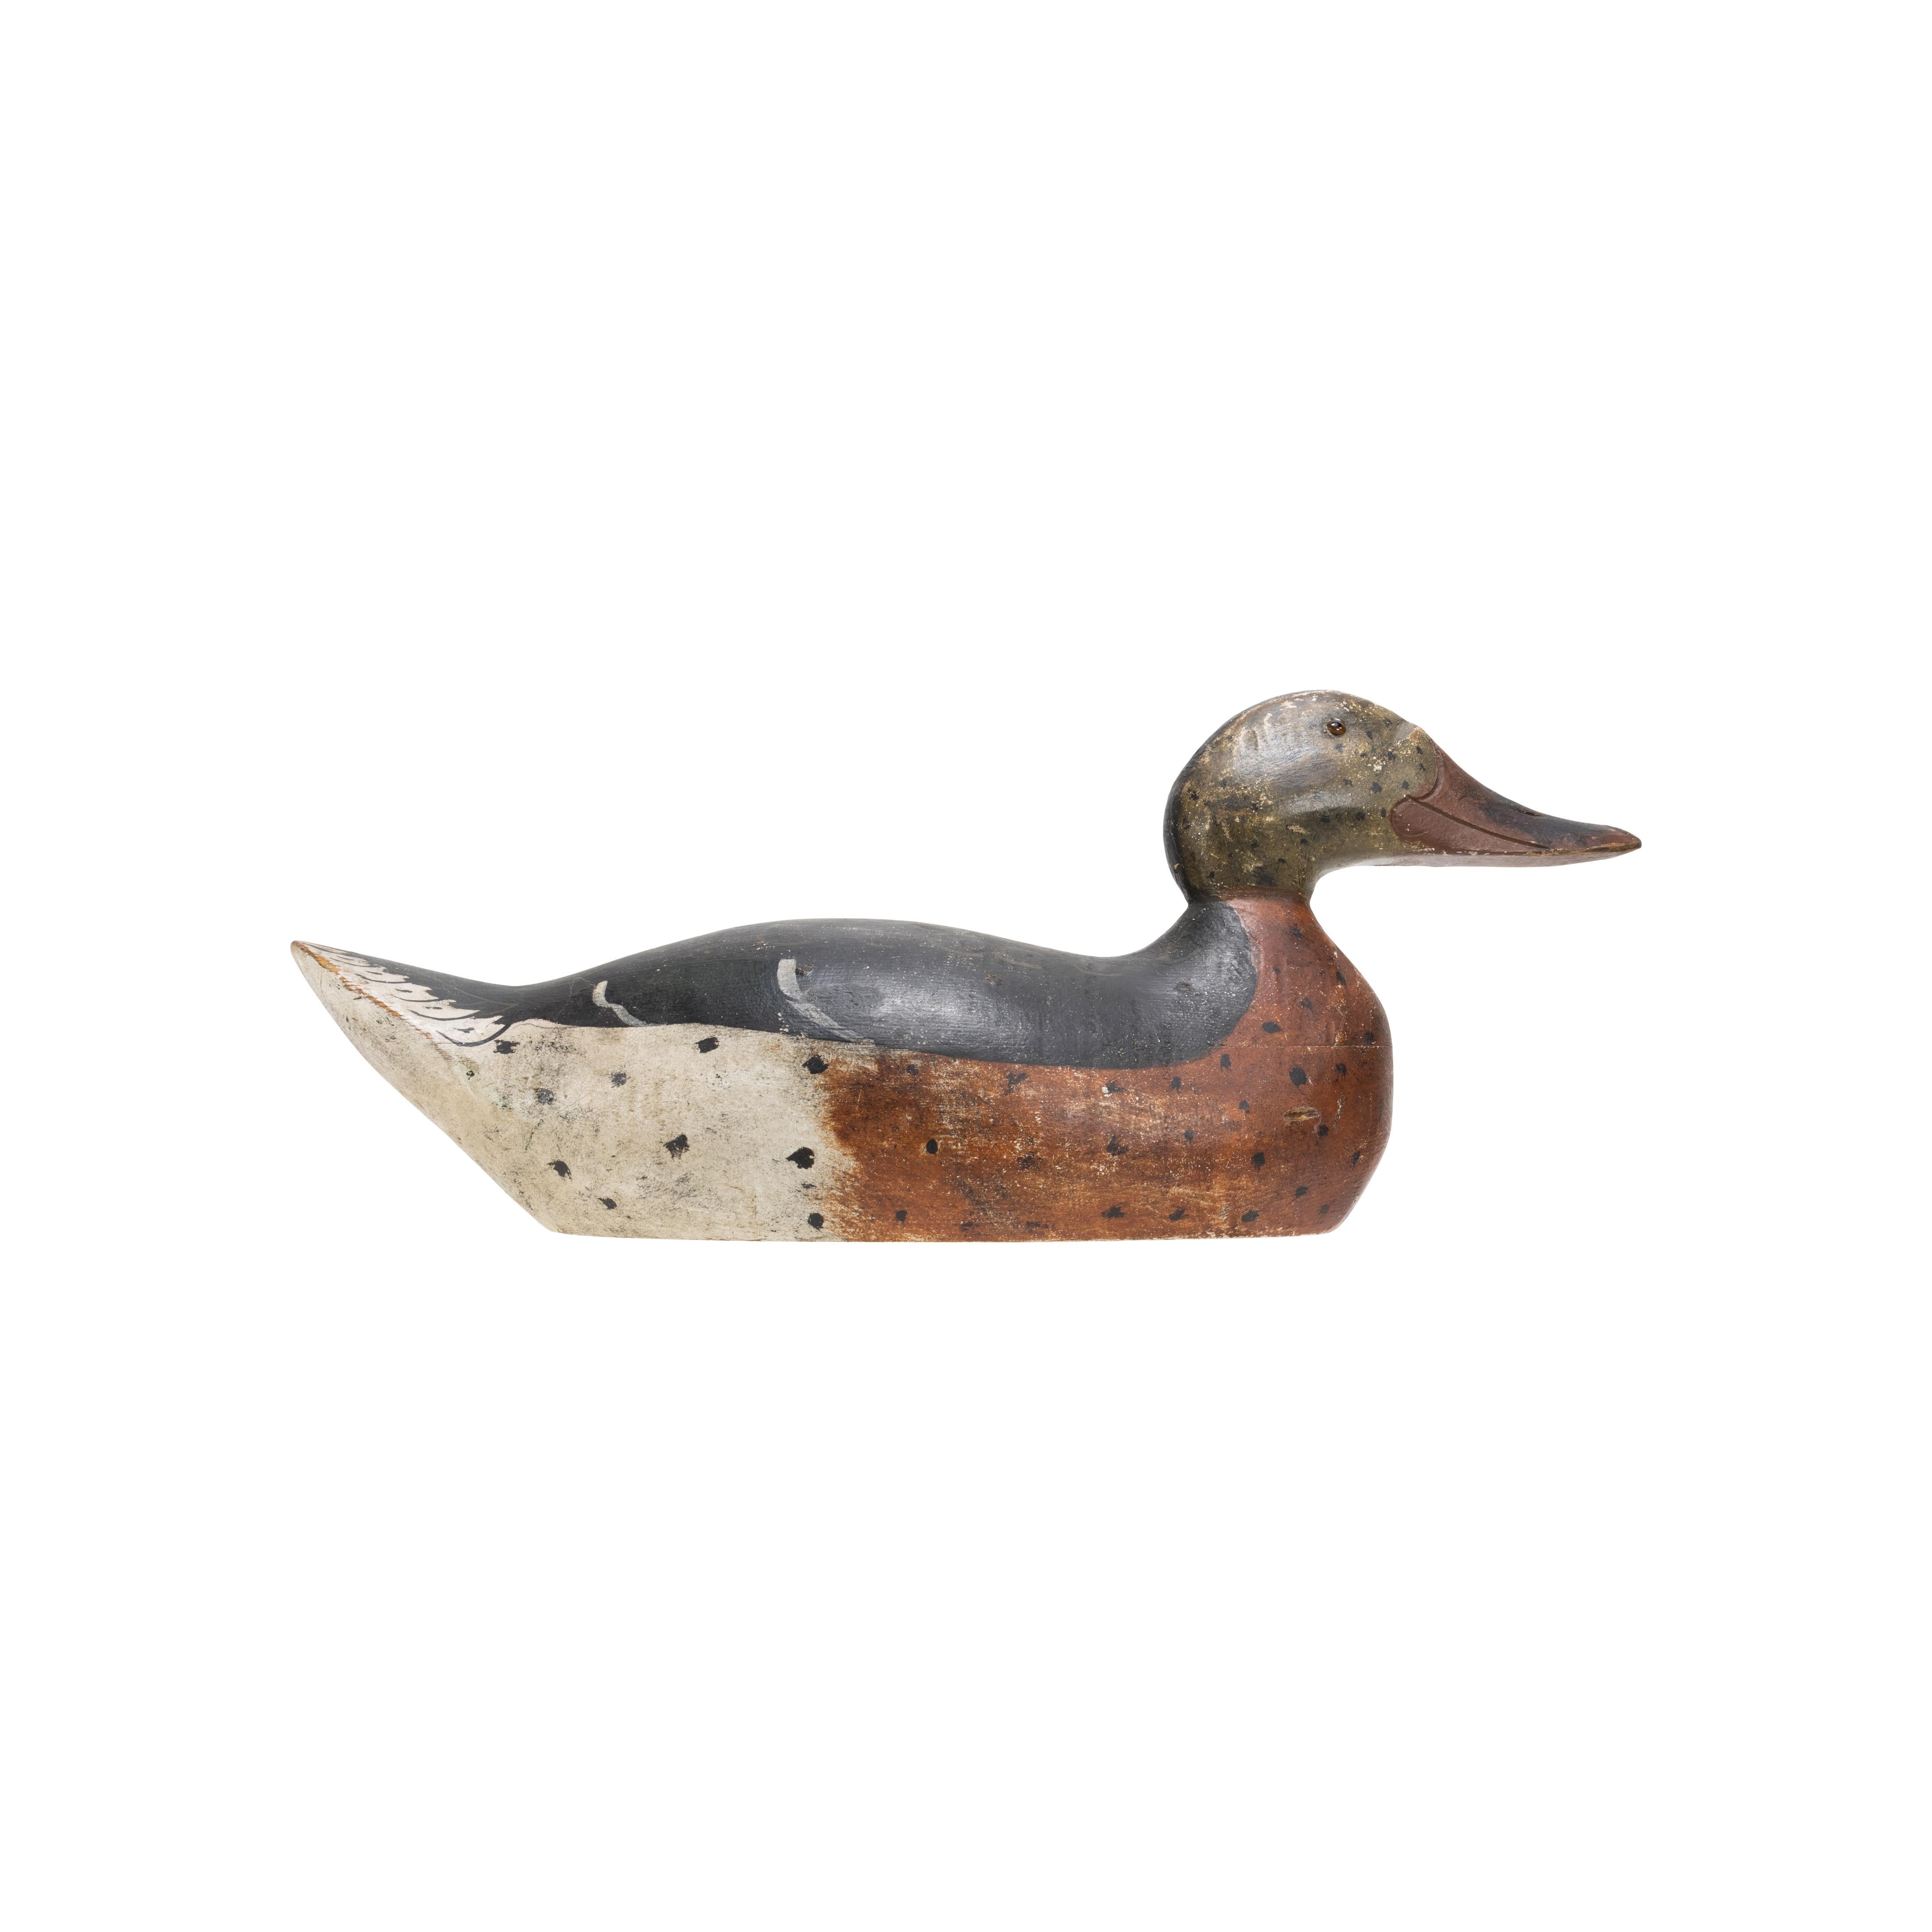 Hays grand prix pair of mallards decoys. Exceptional paint. Priced as a pair. Wear consistent with use adds to the age of the set. 

Period circa 1924
Origin: Detroit, Michigan
Size: 7 3/4